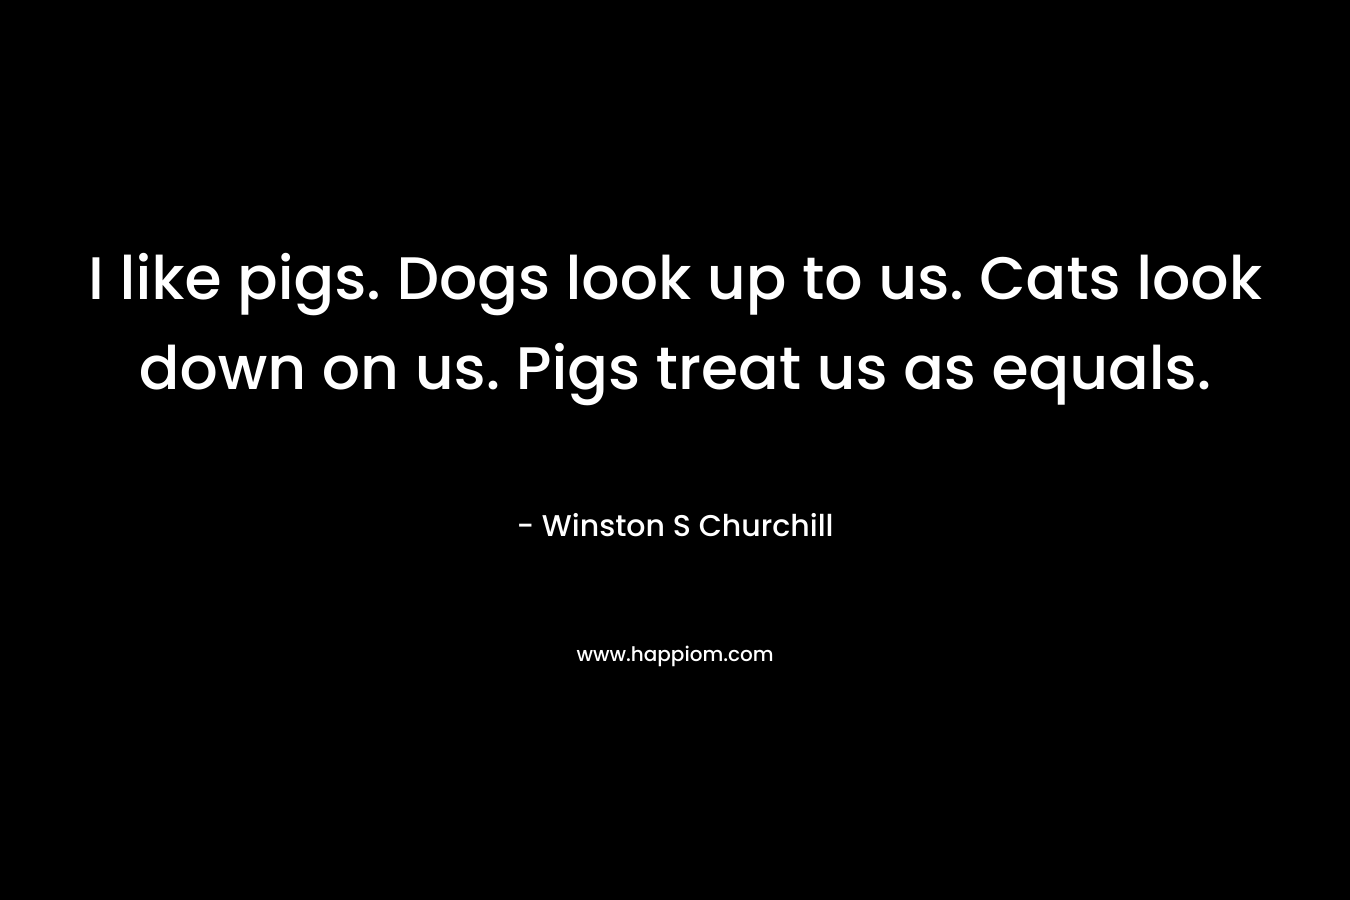 I like pigs. Dogs look up to us. Cats look down on us. Pigs treat us as equals. – Winston S Churchill